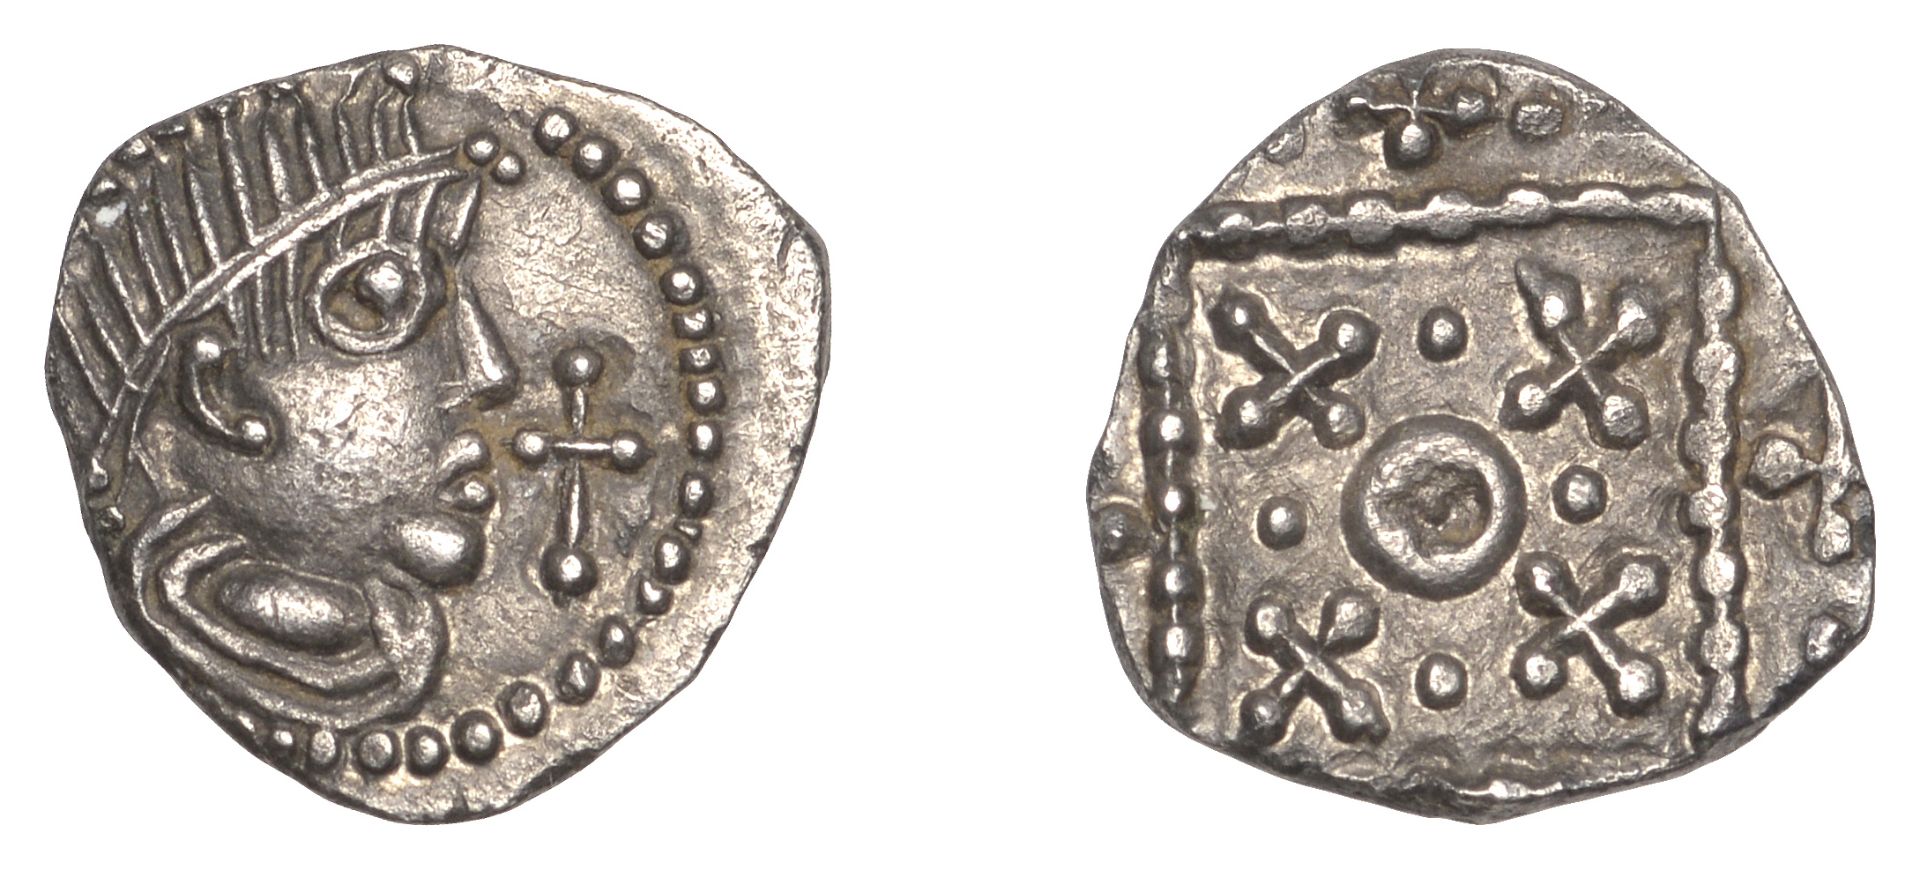 Early Anglo-Saxon Period, Sceatta, Secondary series G(c), type 3a, c. 710-60, diademed and d...